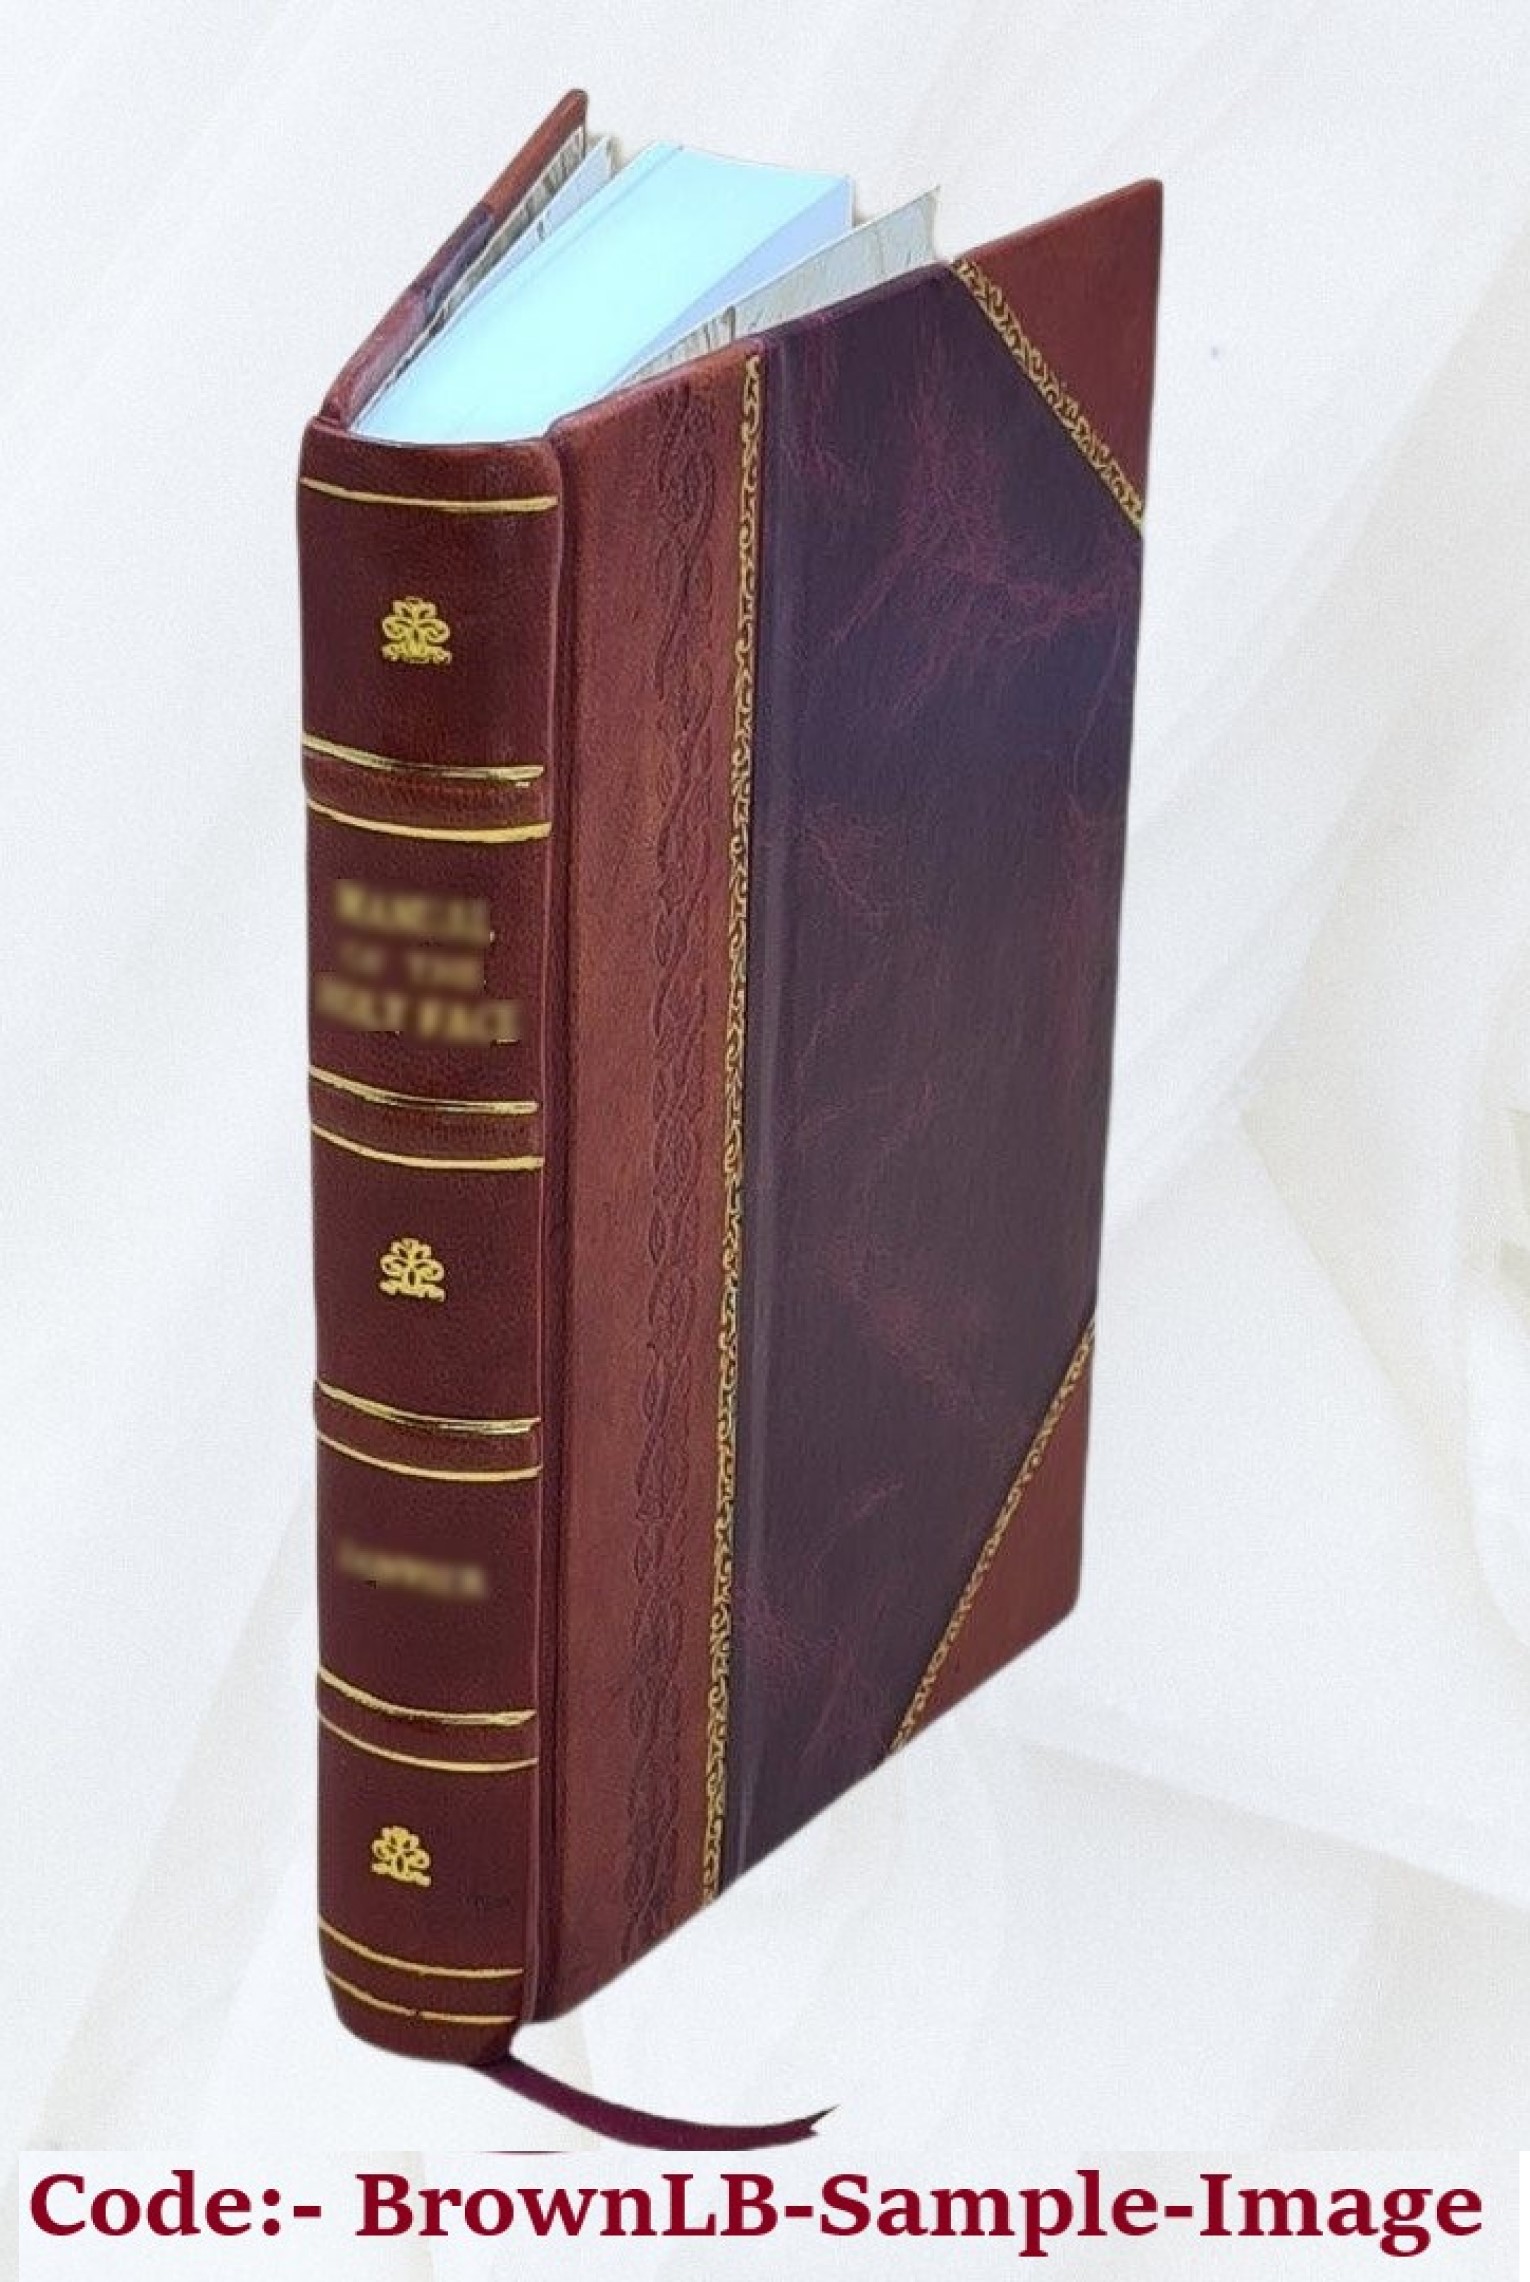 The dead have never died [by] Edward C. Randall. 1920 [Leather Bound] - image 1 of 5